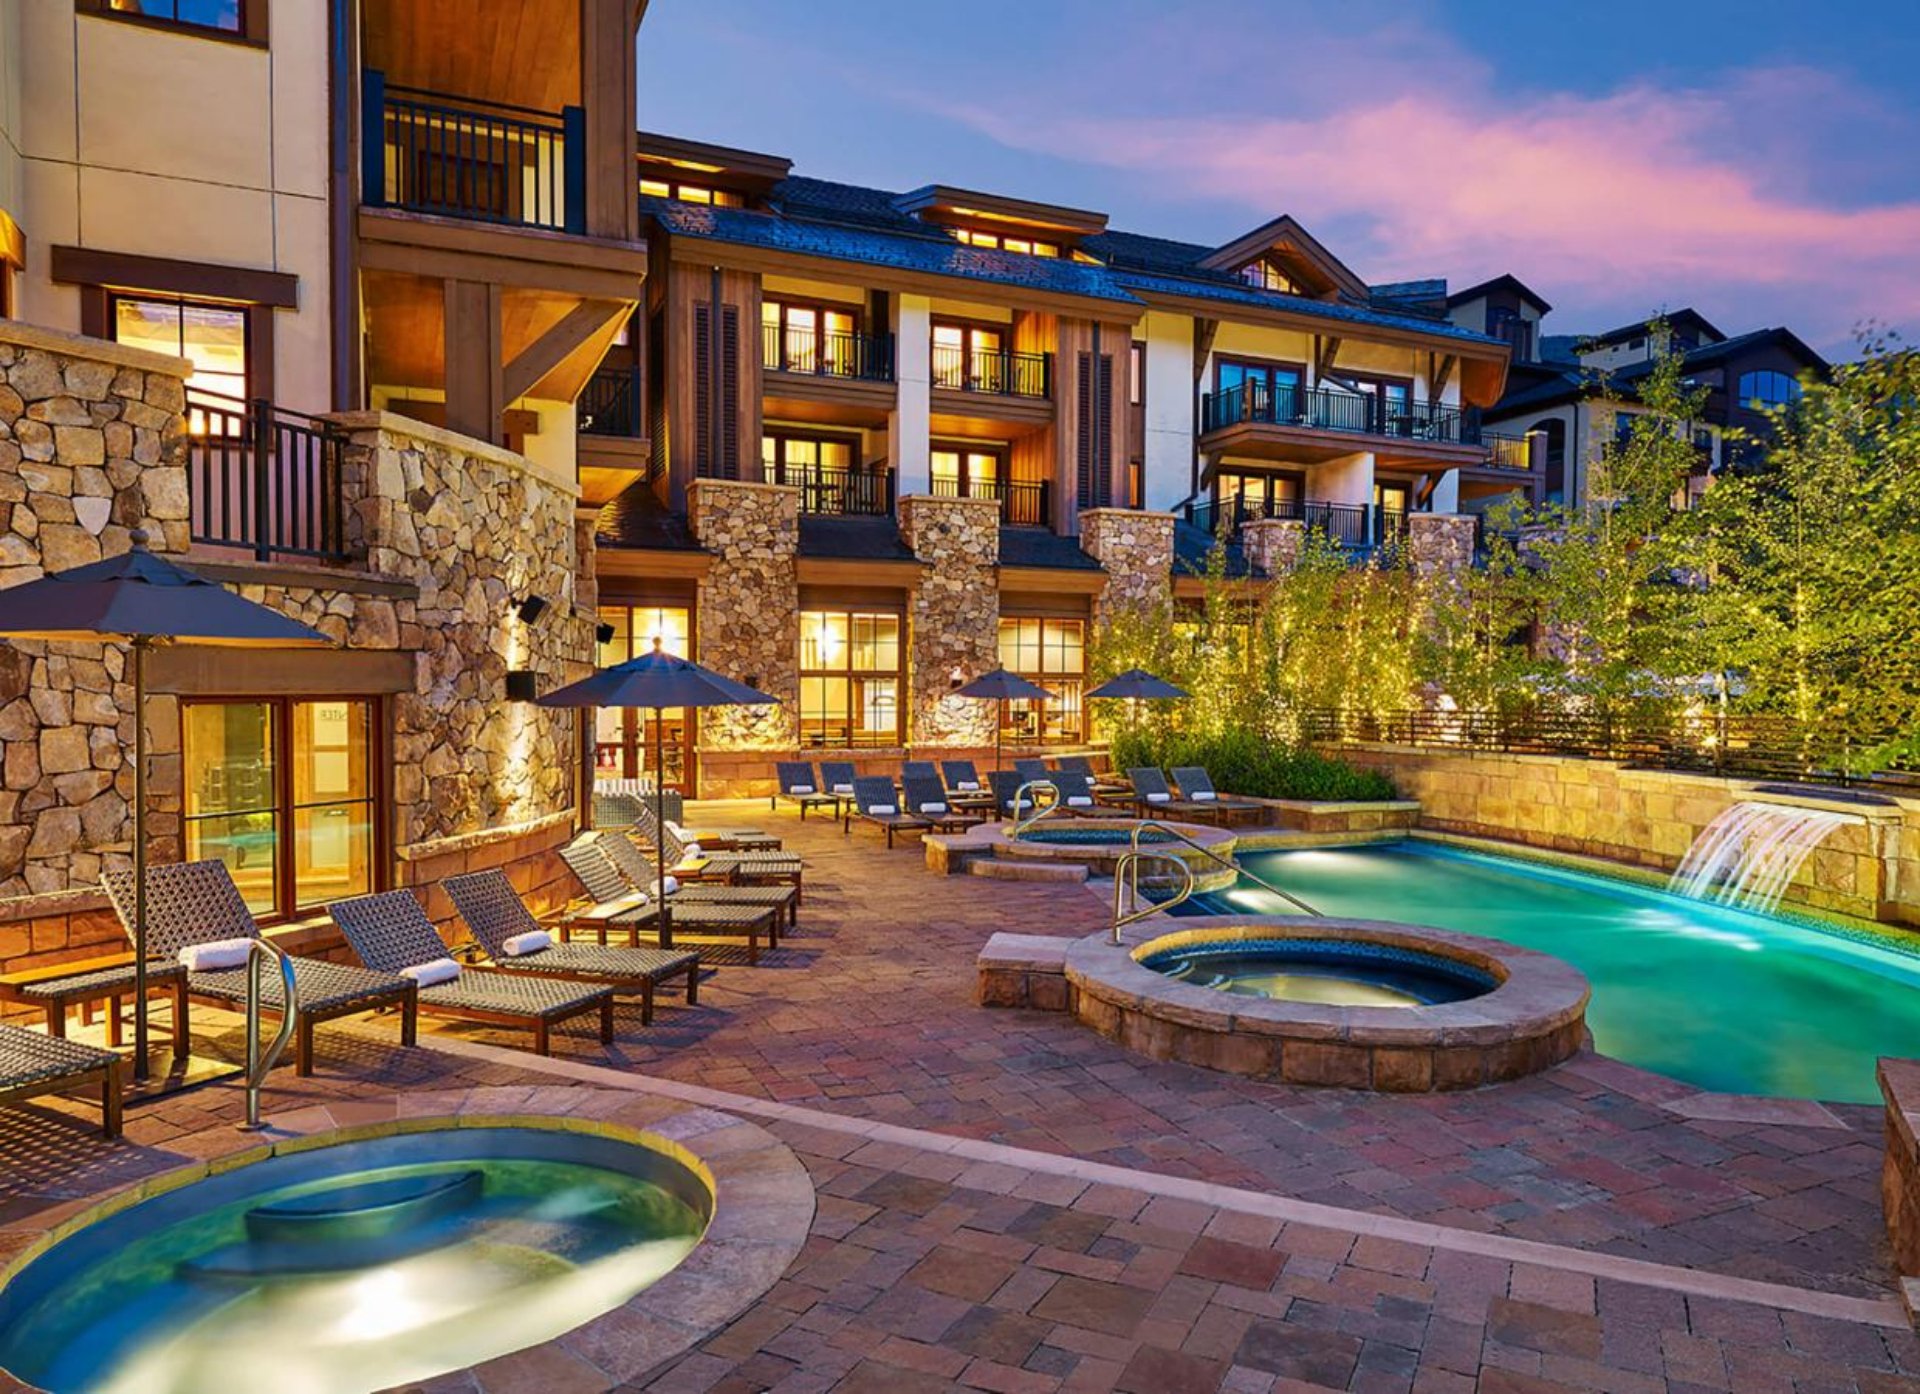 Full Private Condo within a 5 Star Hotel, Vail Village Location